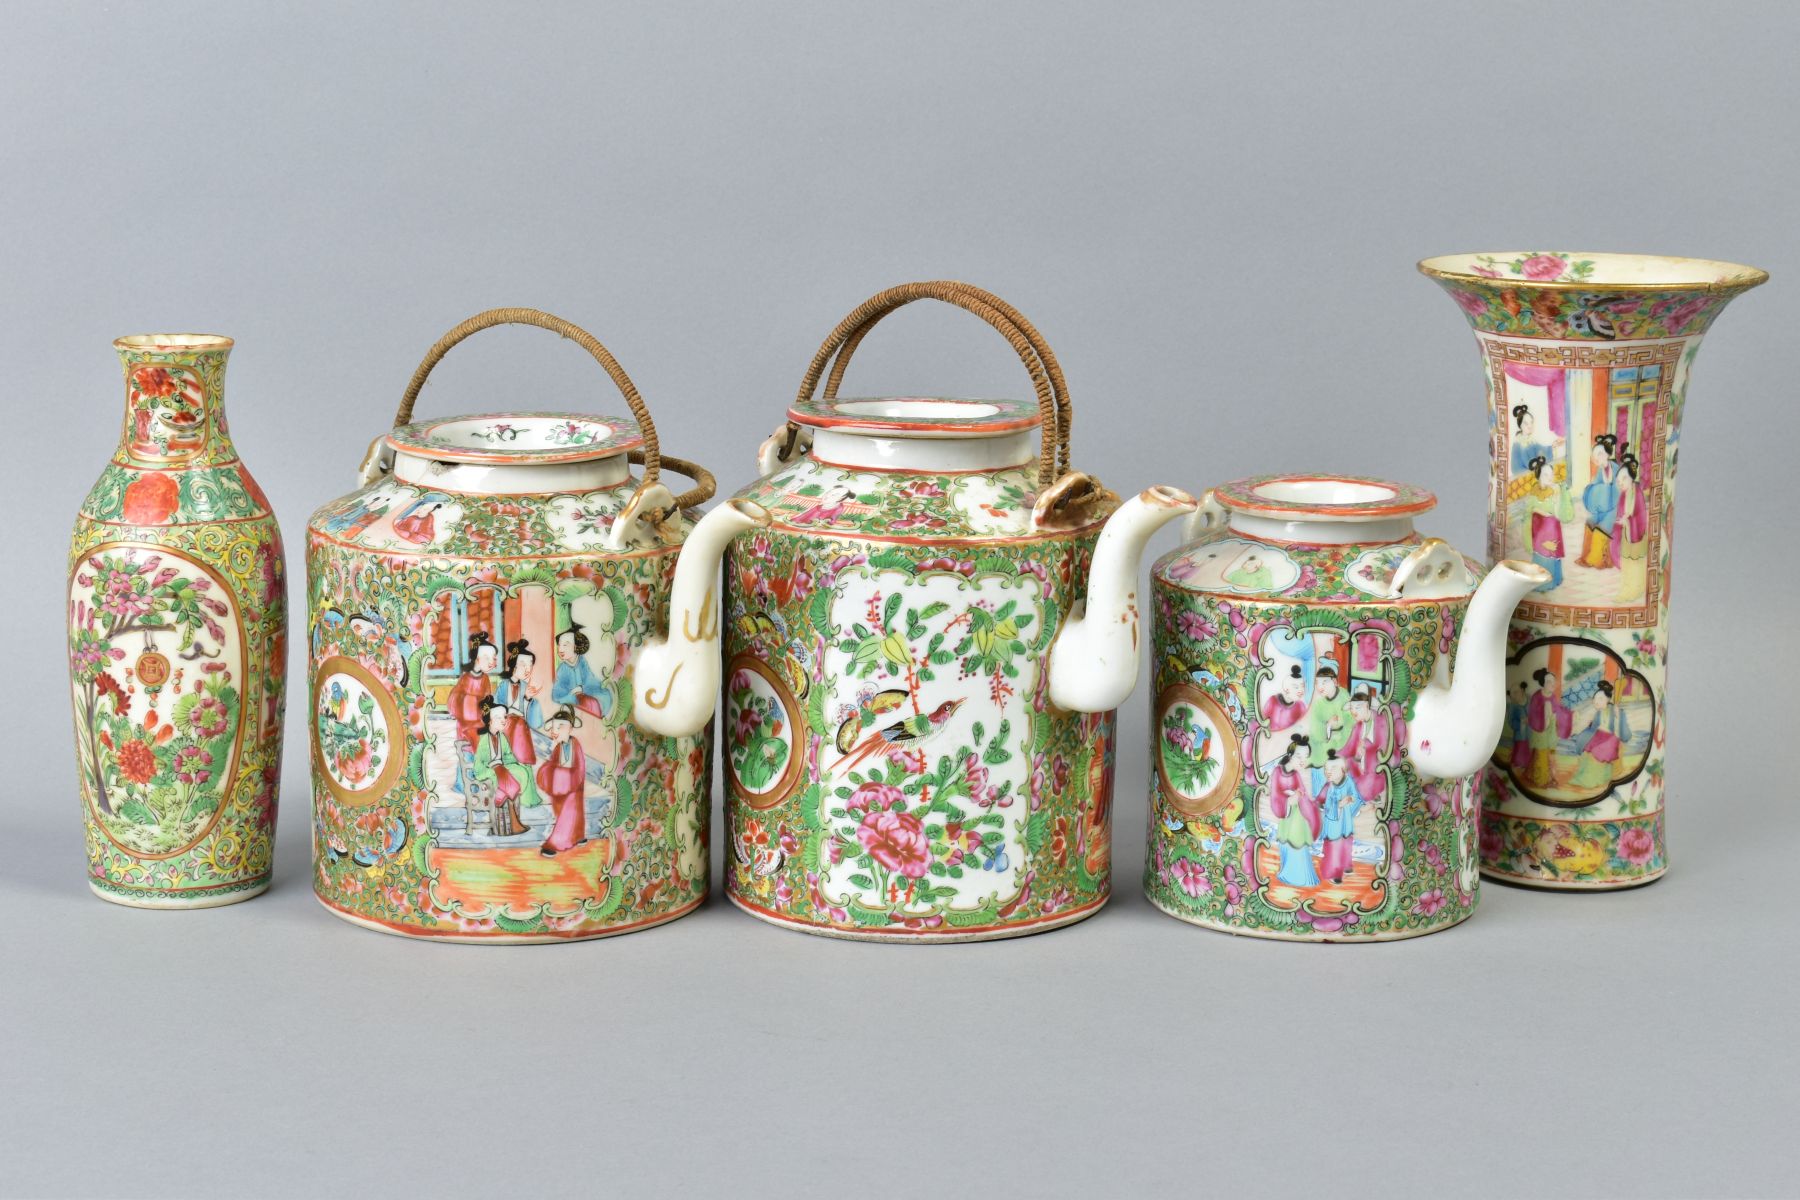 THREE 19TH CENTURY CHINESE CANTON FAMILLE ROSE TEAPOTS AND COVERS, two with wicker handles (s.d.), - Image 4 of 9